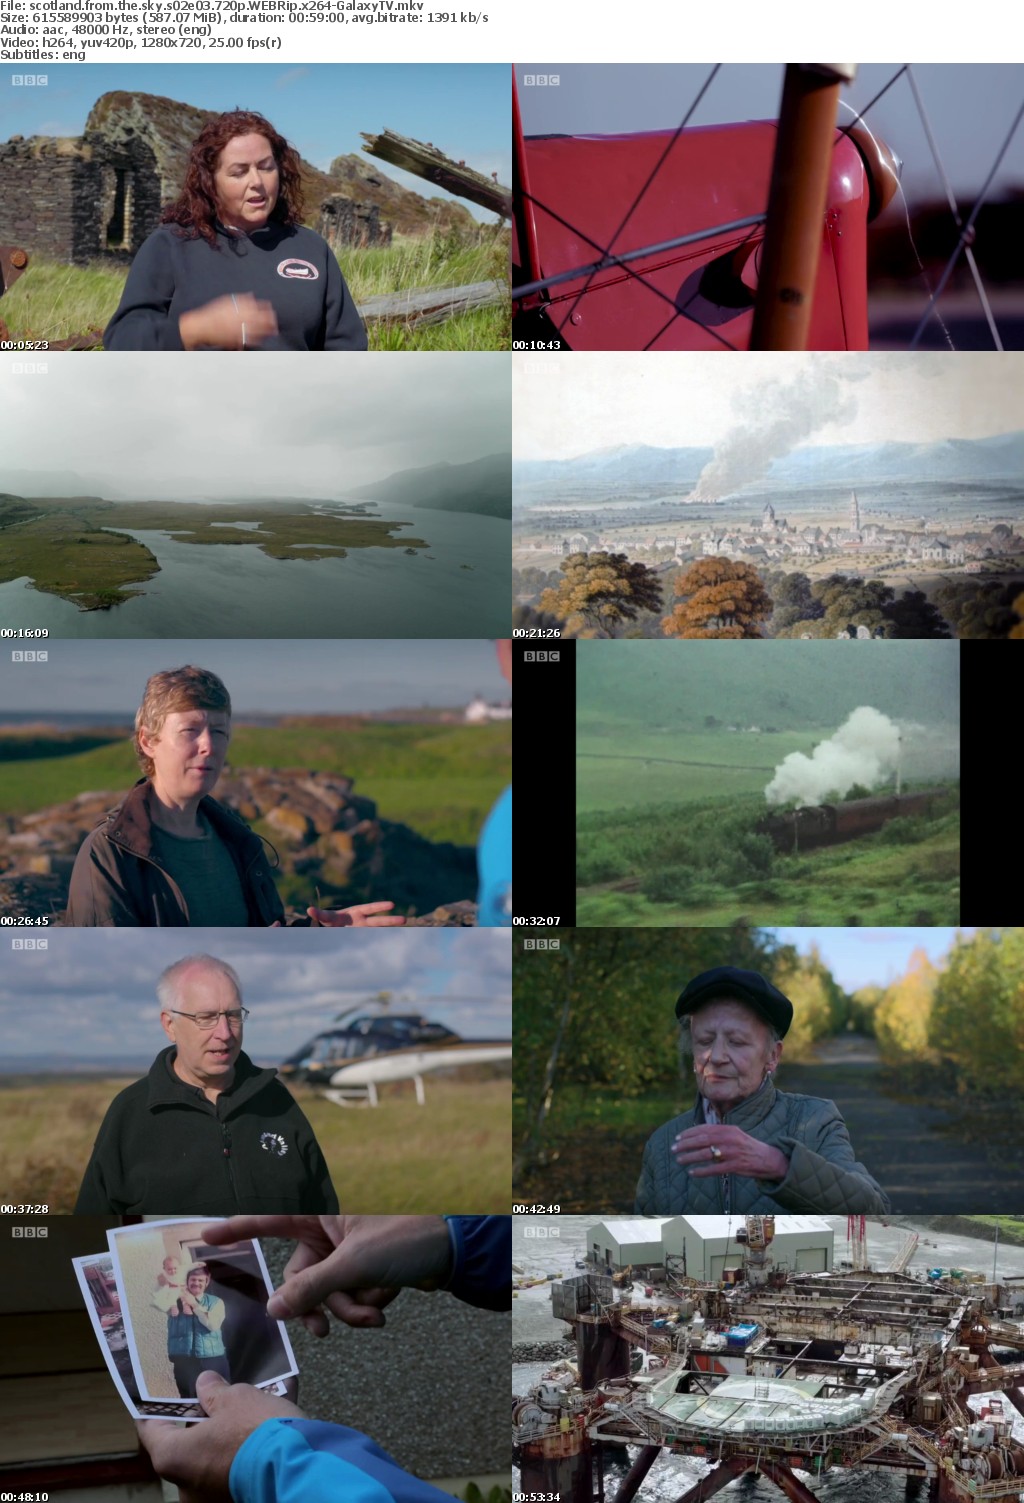 Scotland from the Sky S02 COMPLETE 720p WEBRip x264-GalaxyTV